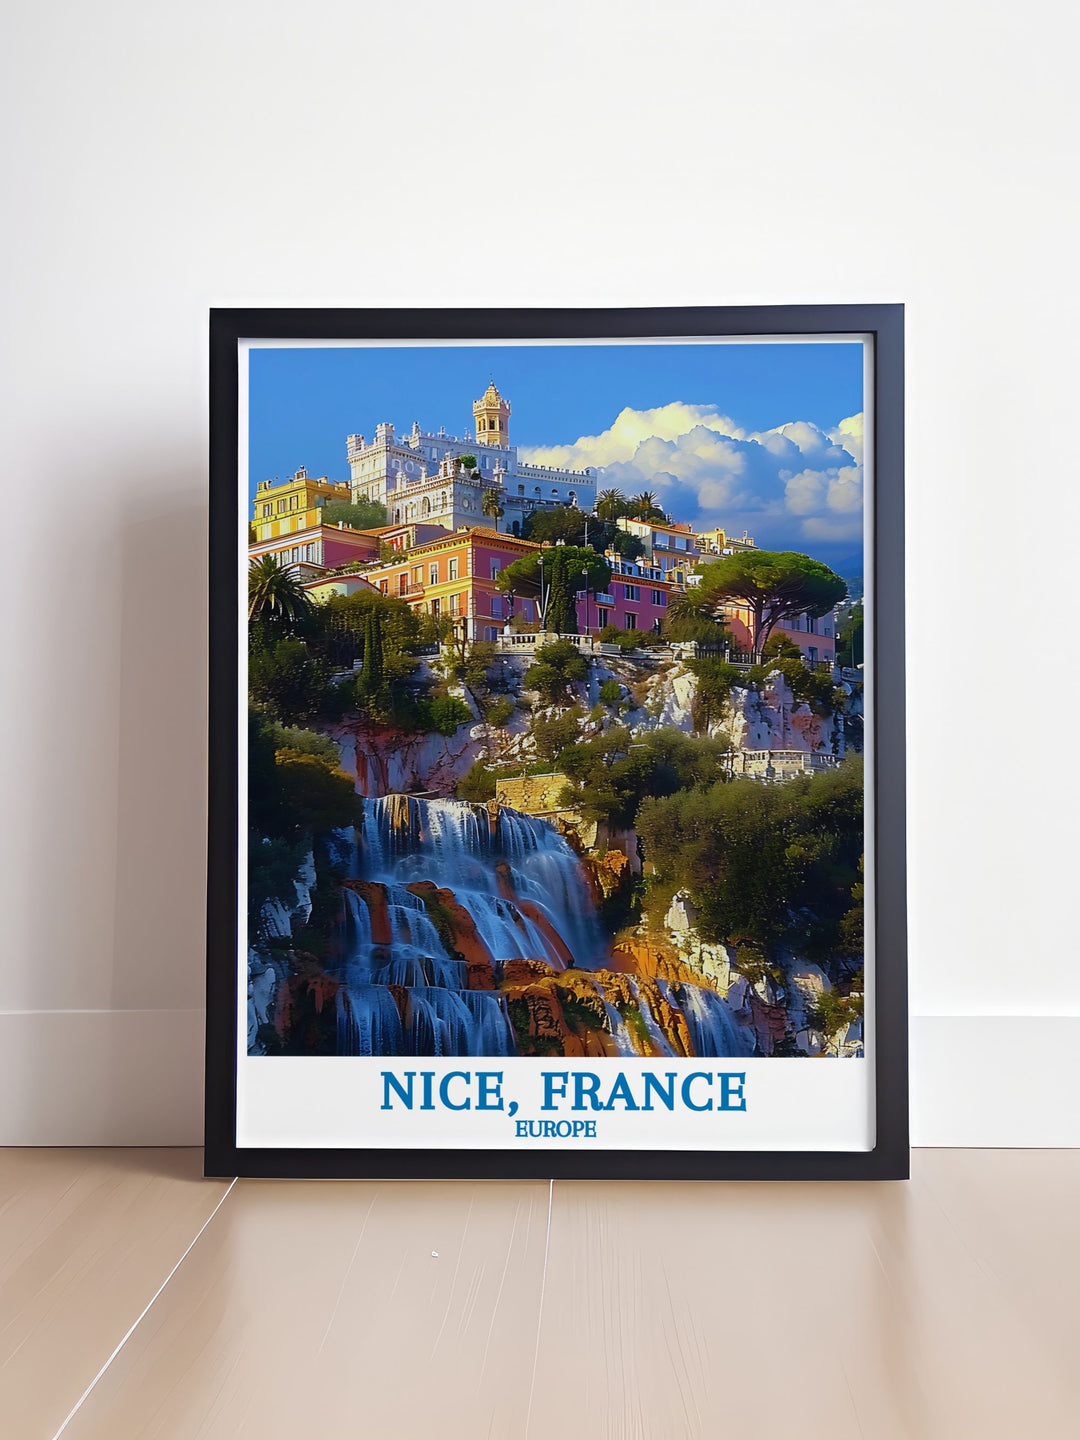 Enhance your living space with this travel poster of Colline du Château, Nice, capturing the serene ambiance and picturesque views from this historic hilltop overlooking the Mediterranean.